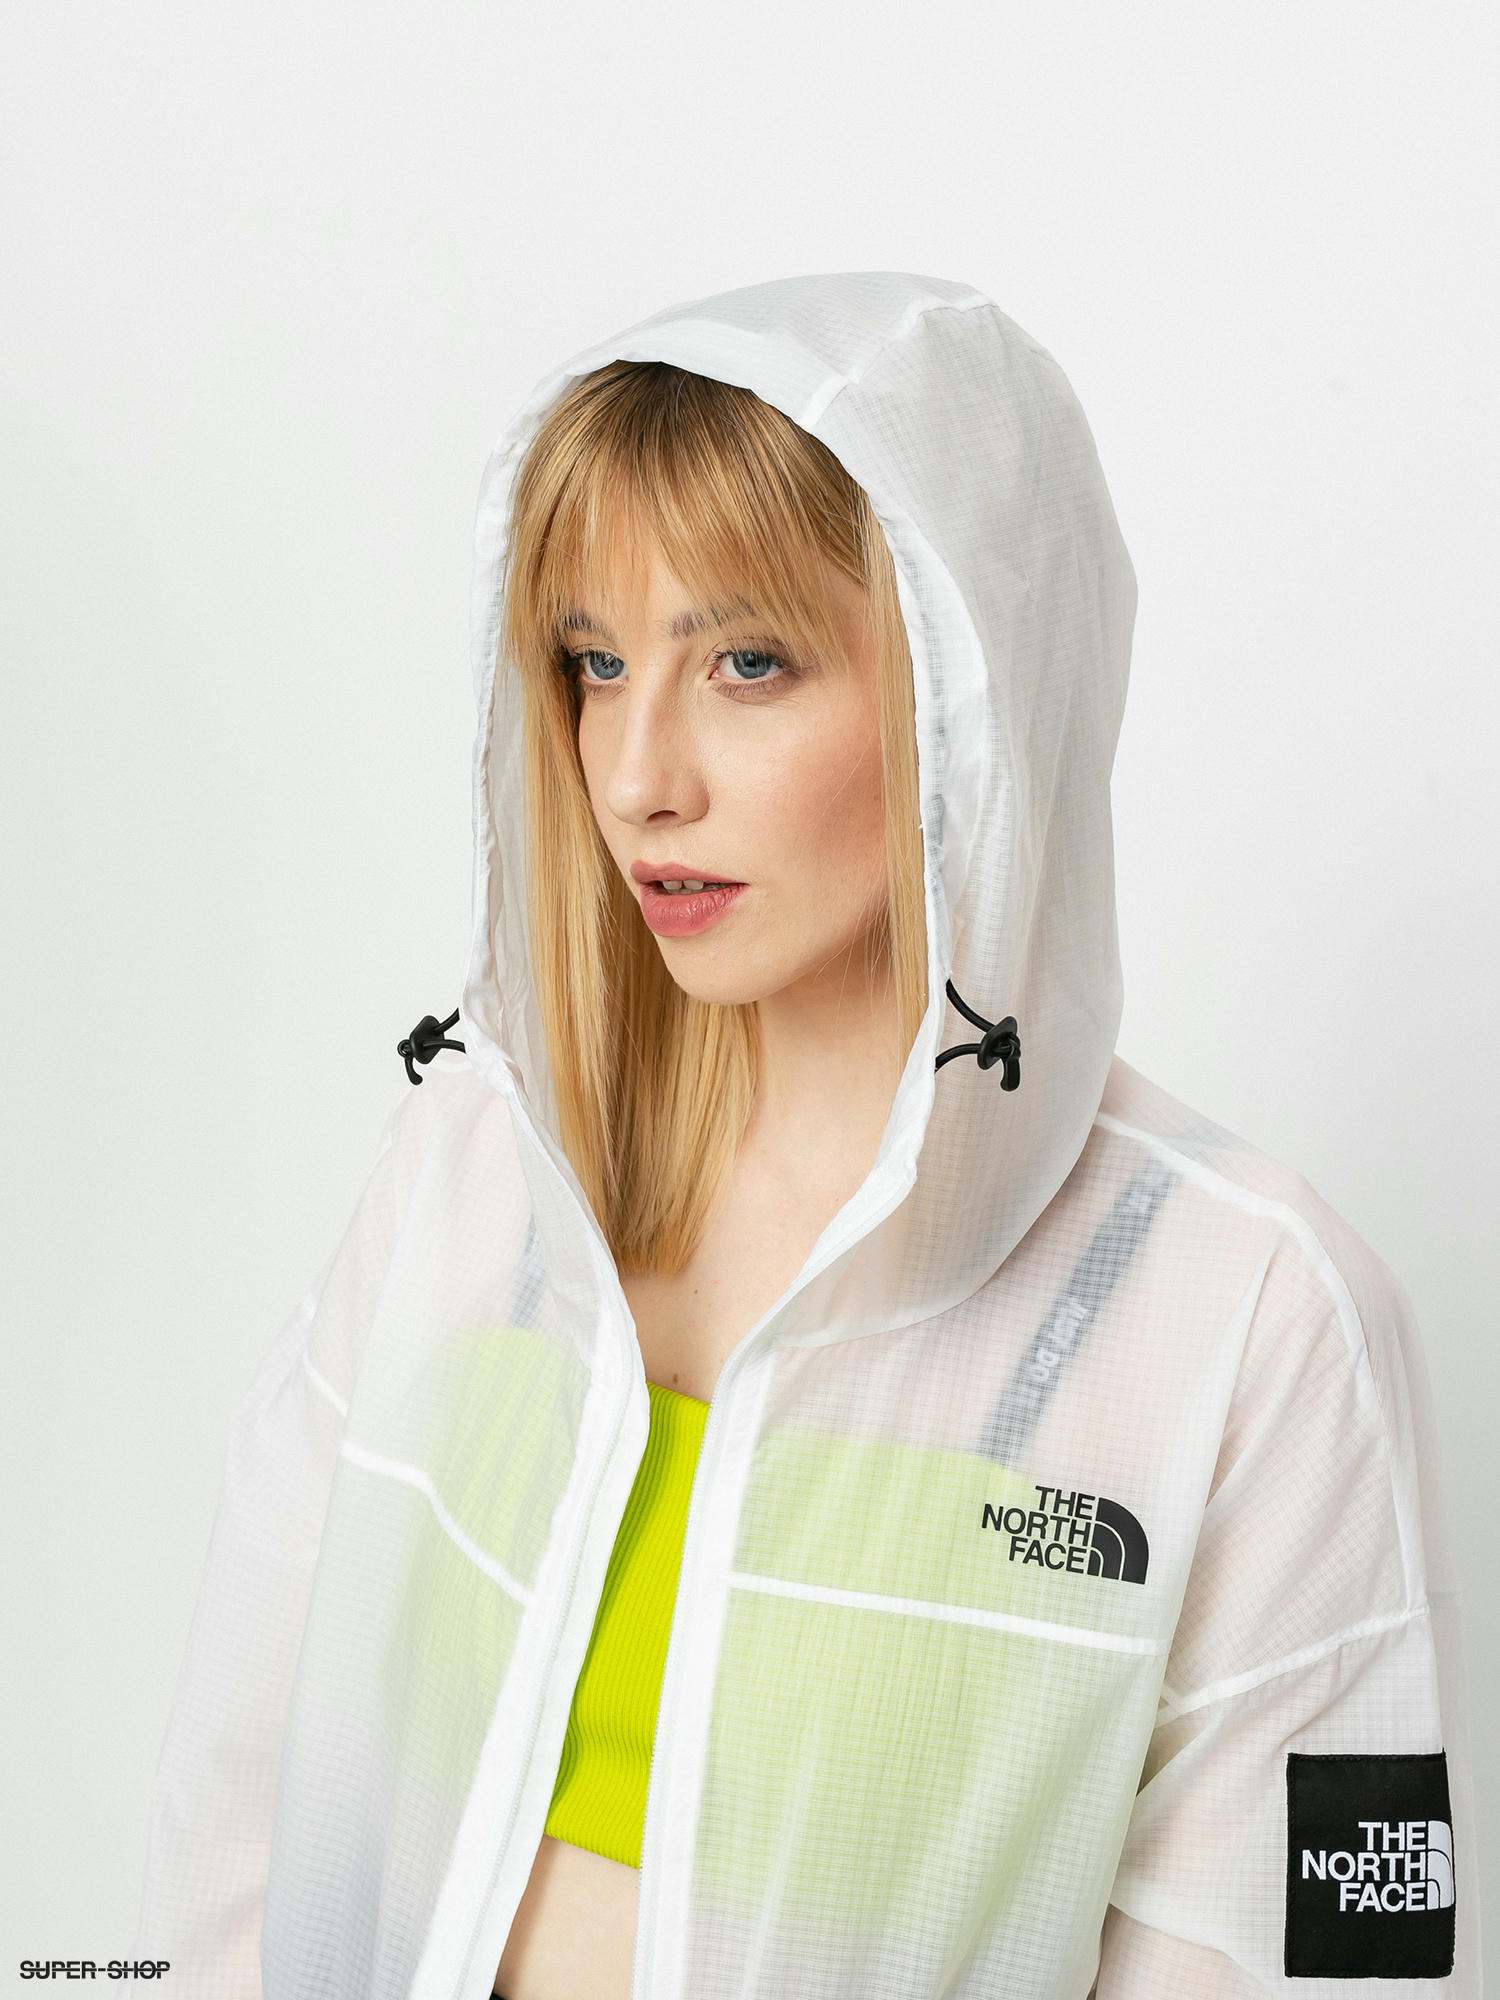 womens north face wind jacket